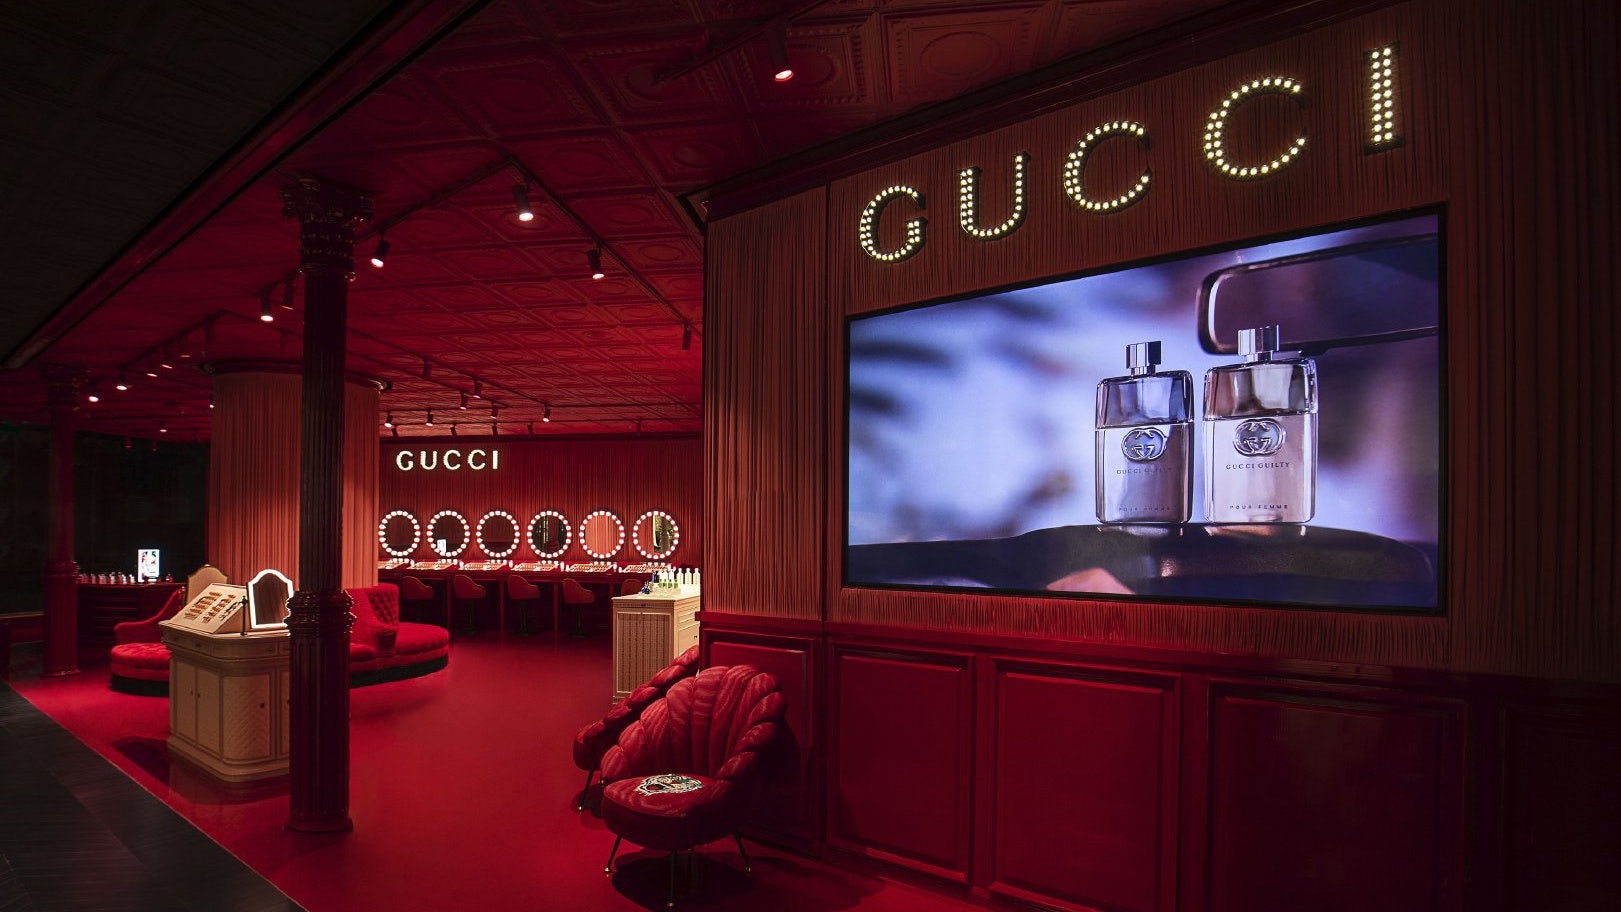 Online retailing has undoubtedly contributed to the growth of luxury sales in China. Yet, physical retail locations are still a key shopping motivator. Photo: Courtesy of Gucci